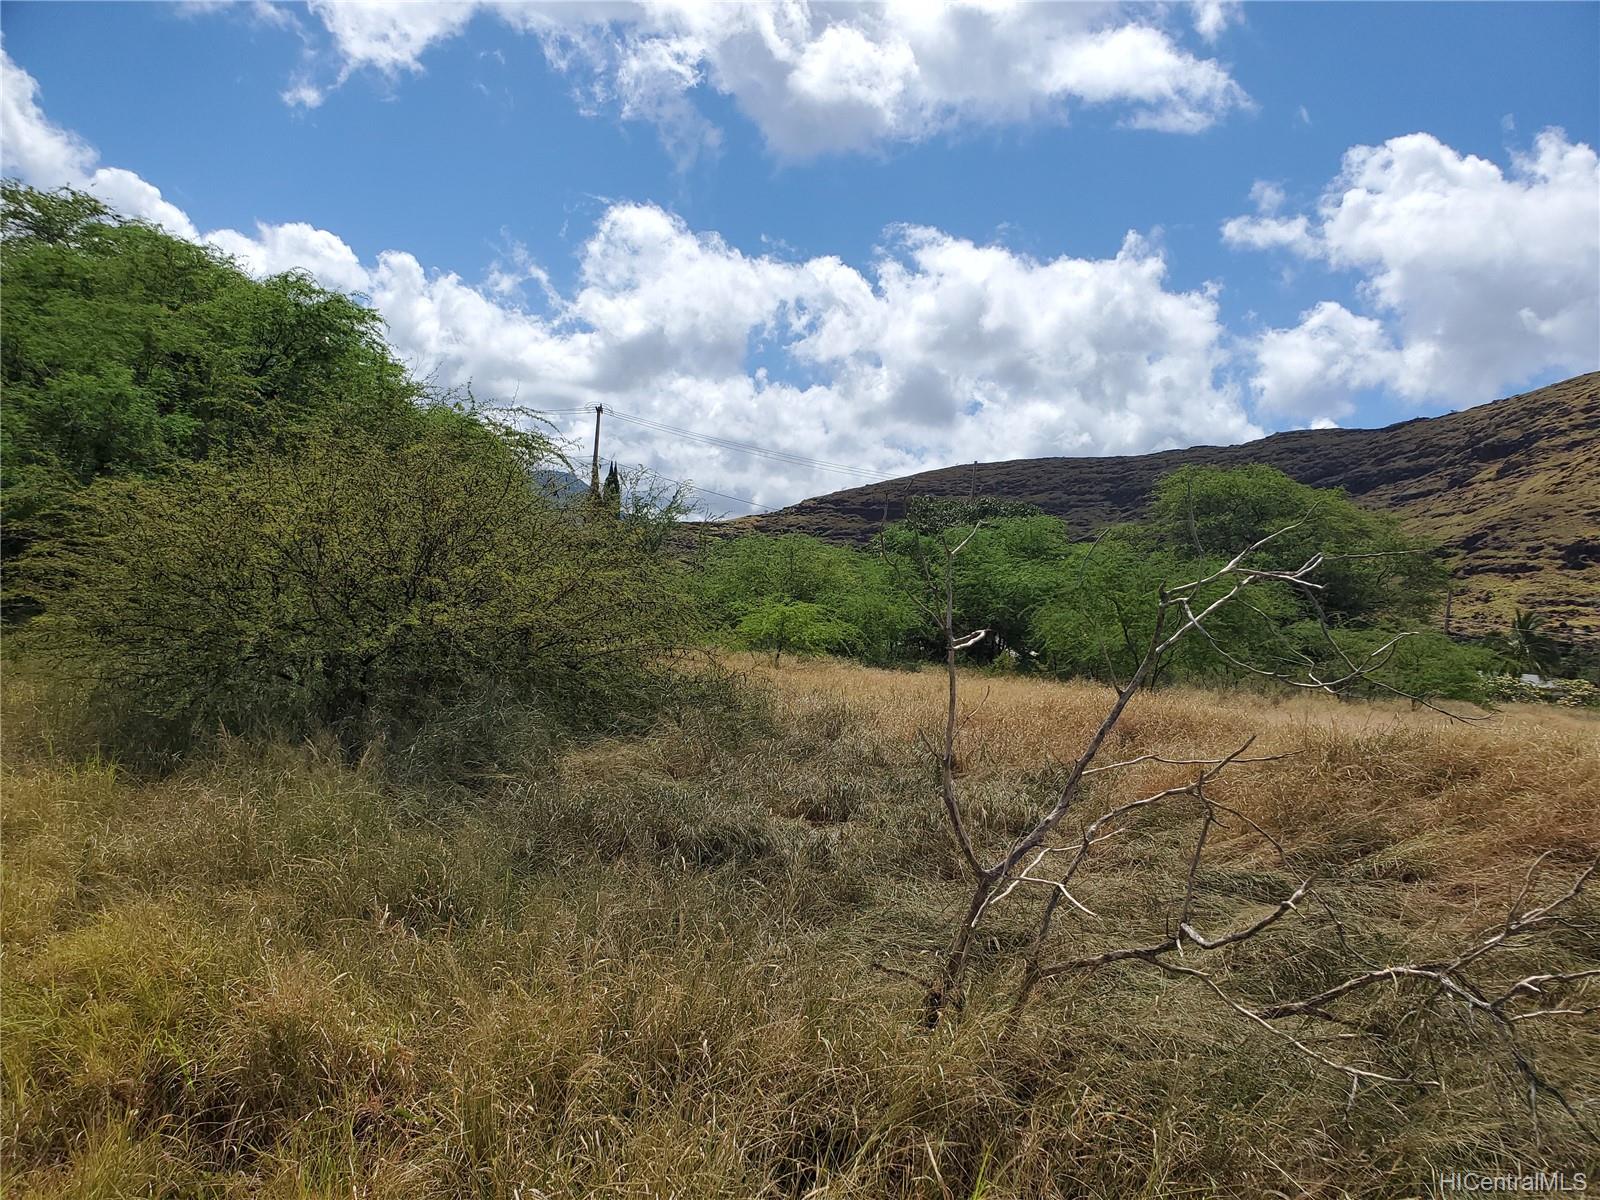 85-560 Waianae Valley Road  Waianae, Hi vacant land for sale - photo 4 of 15